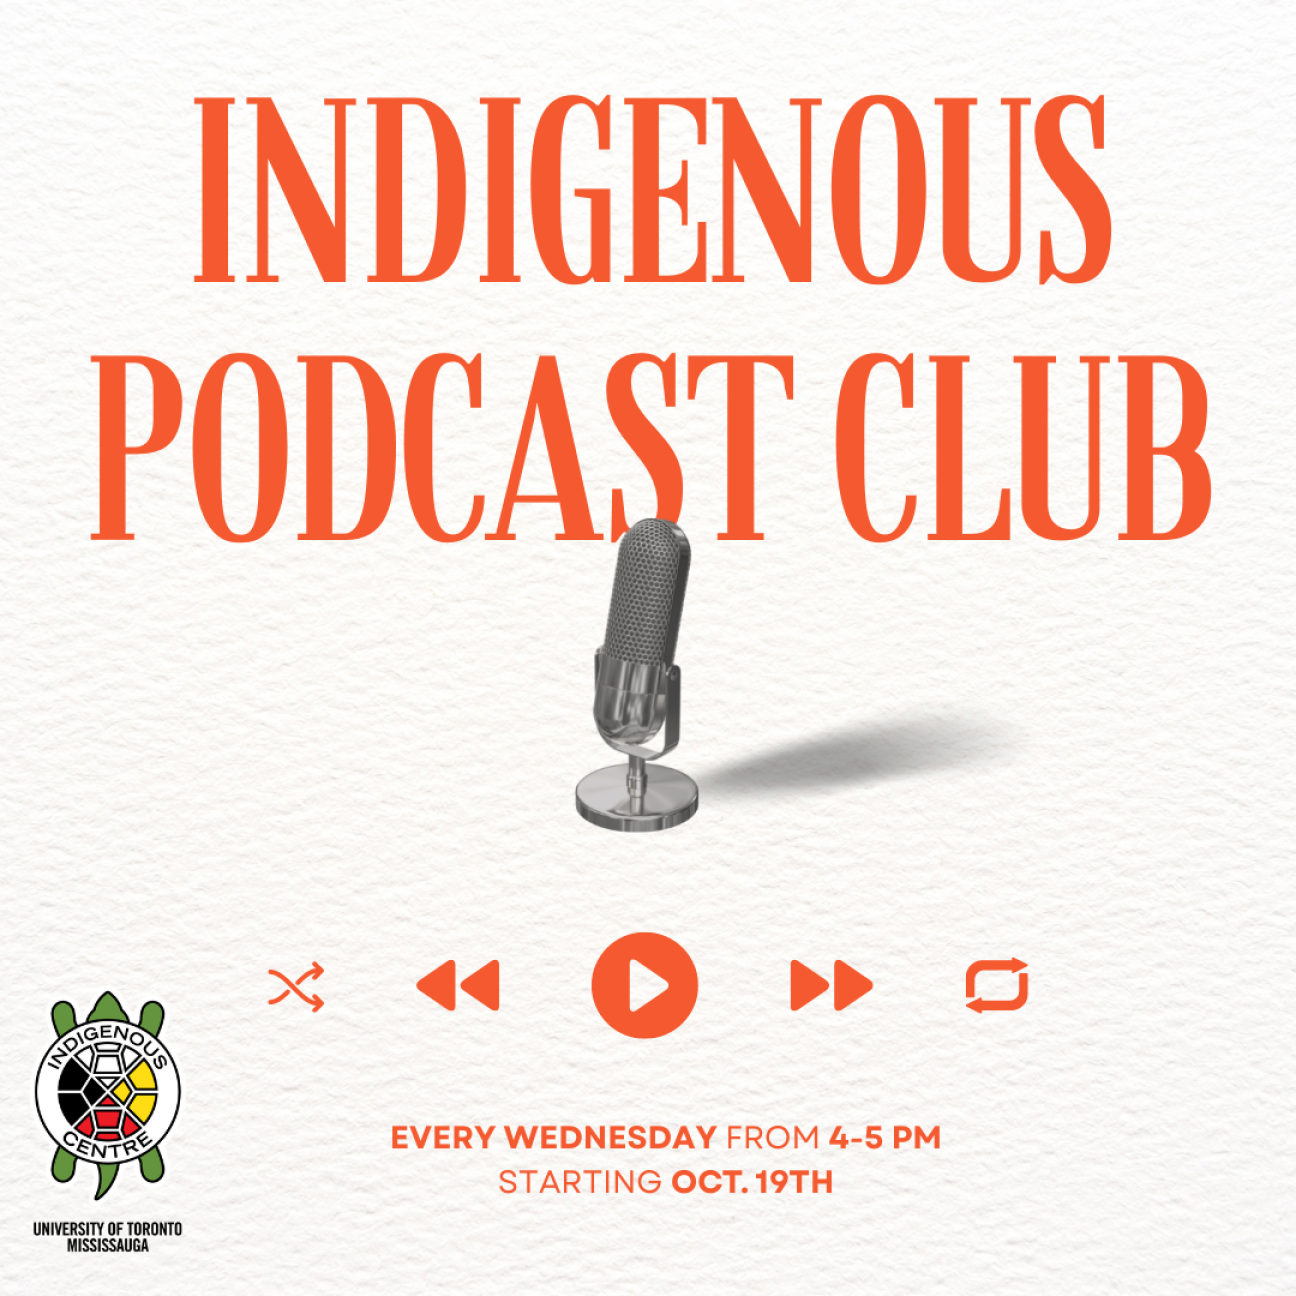 large orange text across the top reads, "Indigenous Podcast Club" with a handheld microphone stand in the middle with the 'shuffle' 'rewind' 'play/pause' 'forward' 'loop' icons across the bottom middle in orange, underneath the icons at the bottom middle reads Starting October 19th every Wednesday from 4-5PM with a The Indigenous Centre at the University of Toronto Mississauga icon of a turtle in the bottom left hand